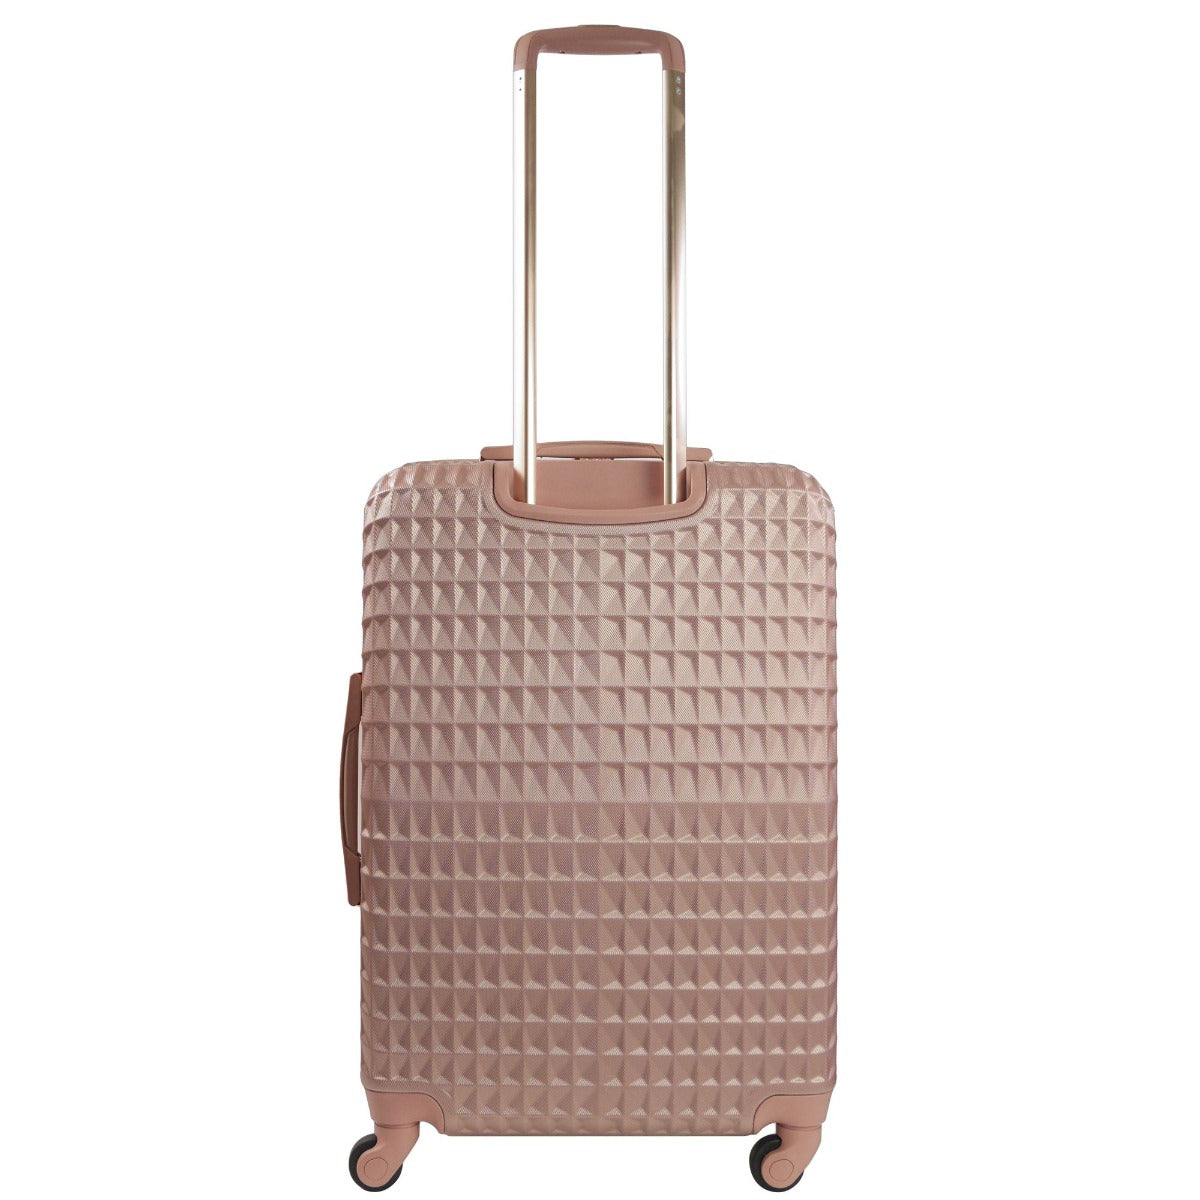 Ful Geo 26 inch hard sided spinner suitcase checked bag luggage rose gold